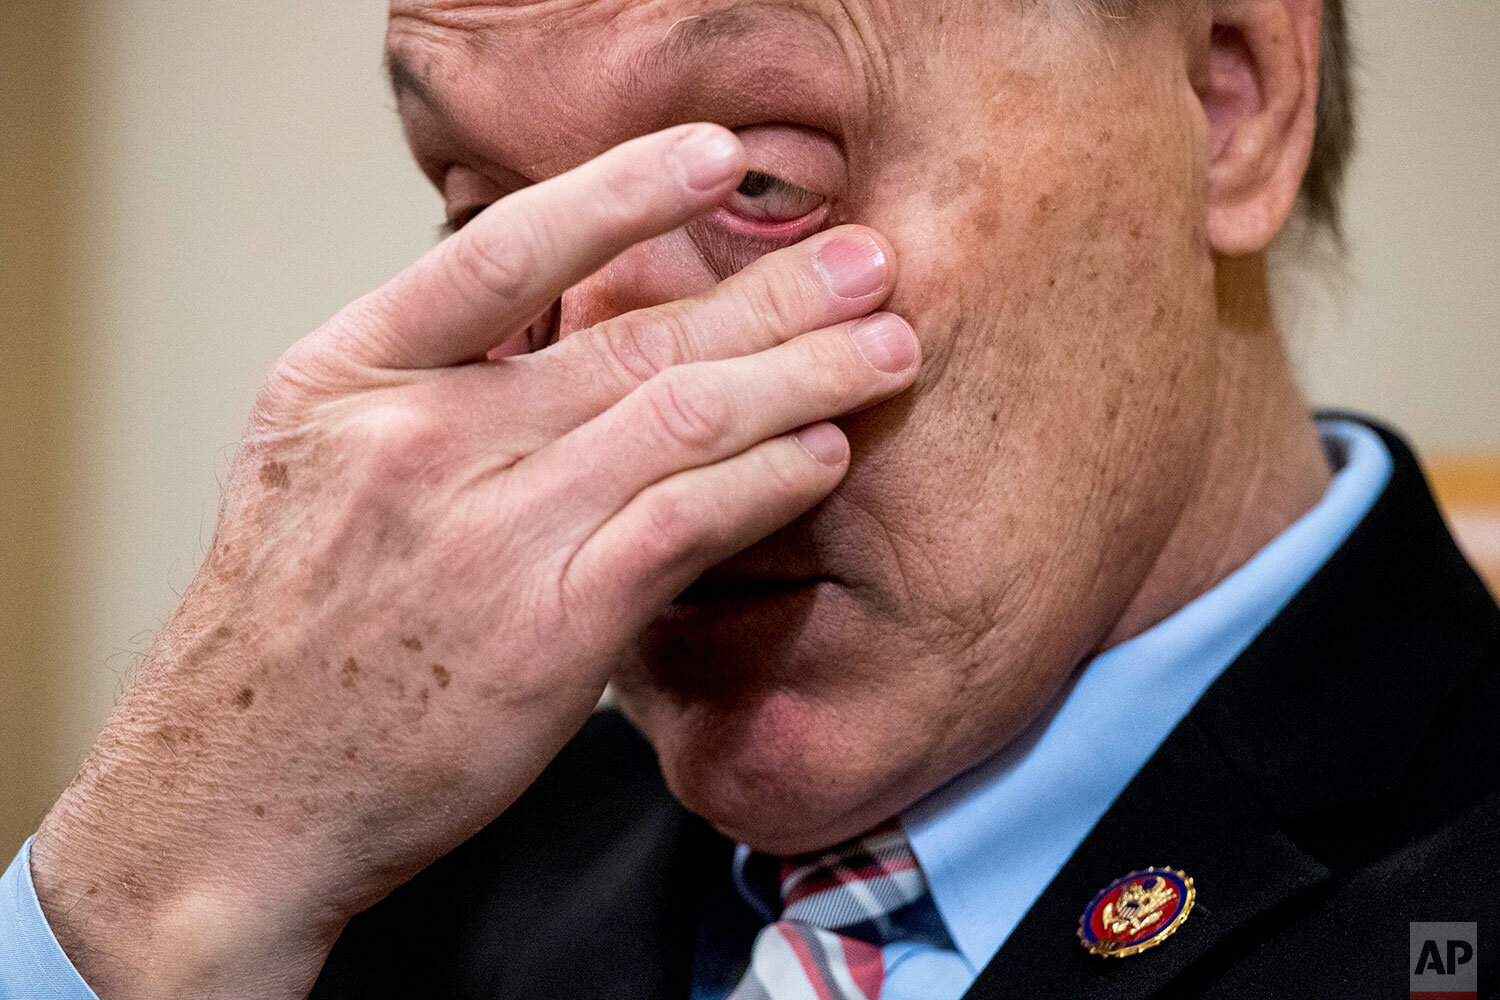  Rep. Andy Biggs, R-Ariz., rubs his eyes during a House Judiciary Committee markup of the articles of impeachment against President Donald Trump, Thursday, Dec. 12, 2019, on Capitol Hill in Washington. (AP Photo/Andrew Harnik) 